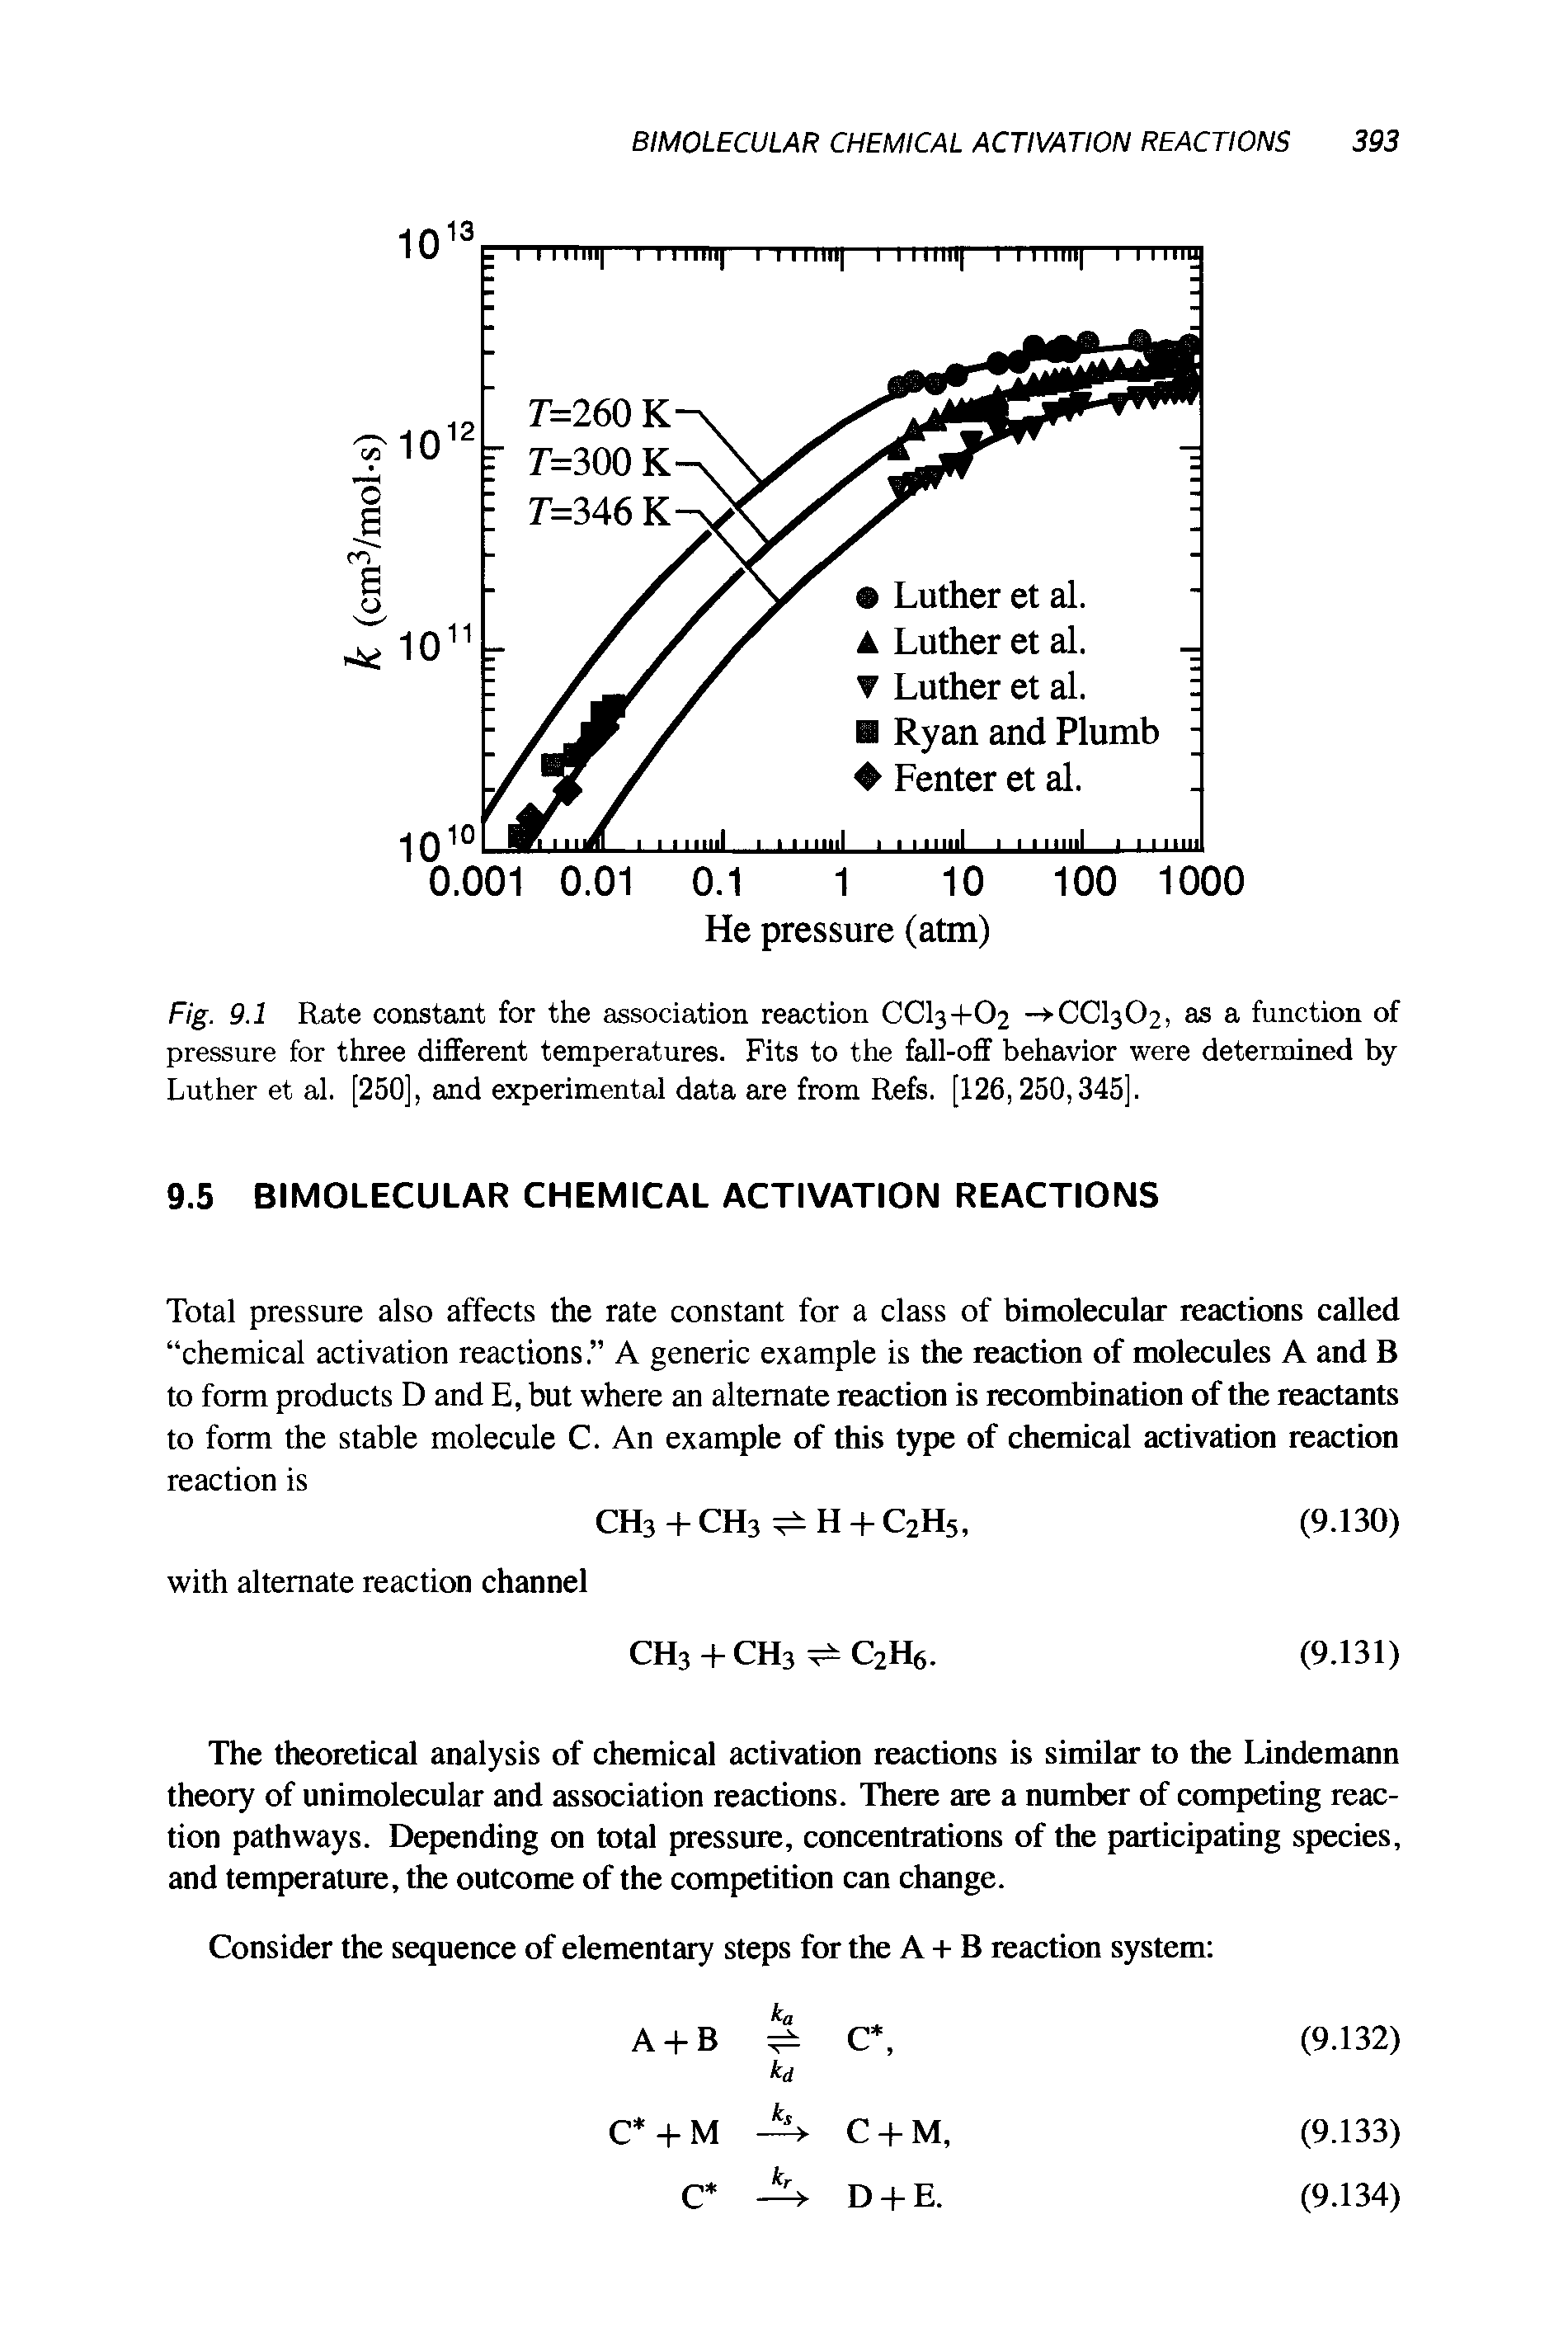 Fig. 9.1 Rate constant for the association reaction CCI3+O2 - CCl3C>2, as a function of pressure for three different temperatures. Fits to the fall-off behavior were determined by Luther et al. [250], and experimental data are from Refs. [126, 250,345].